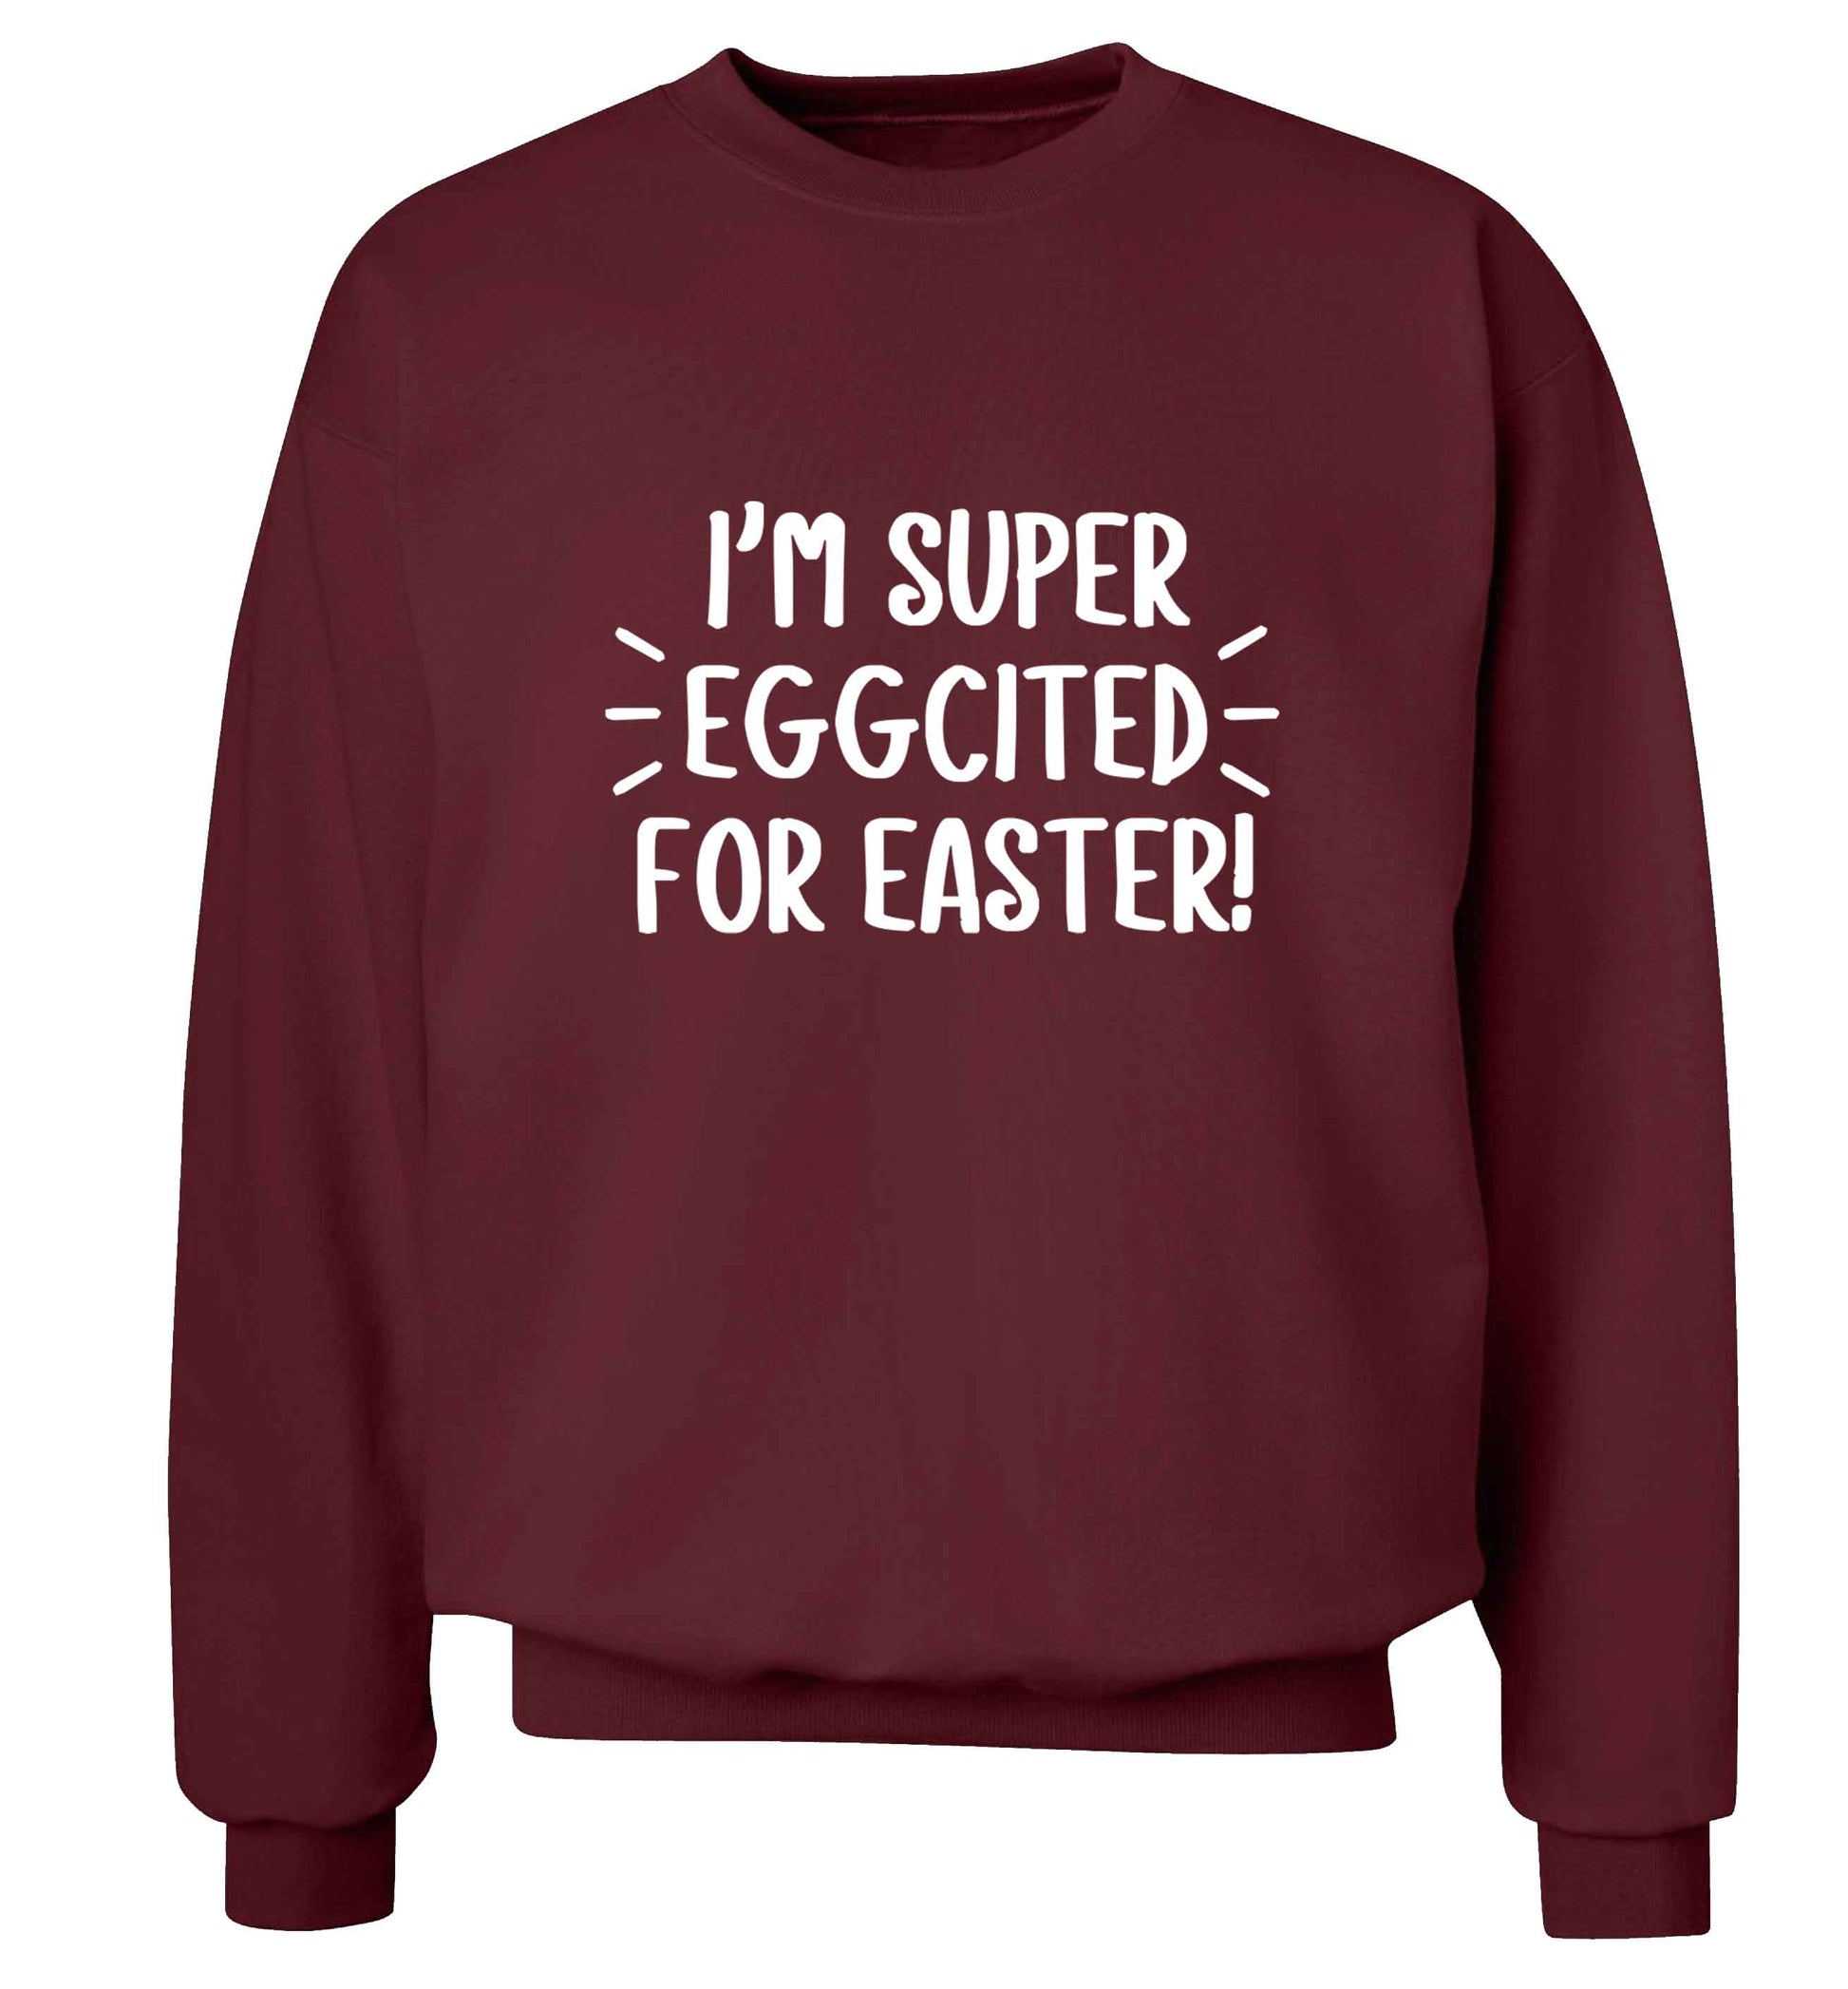 I'm super eggcited for Easter adult's unisex maroon sweater 2XL